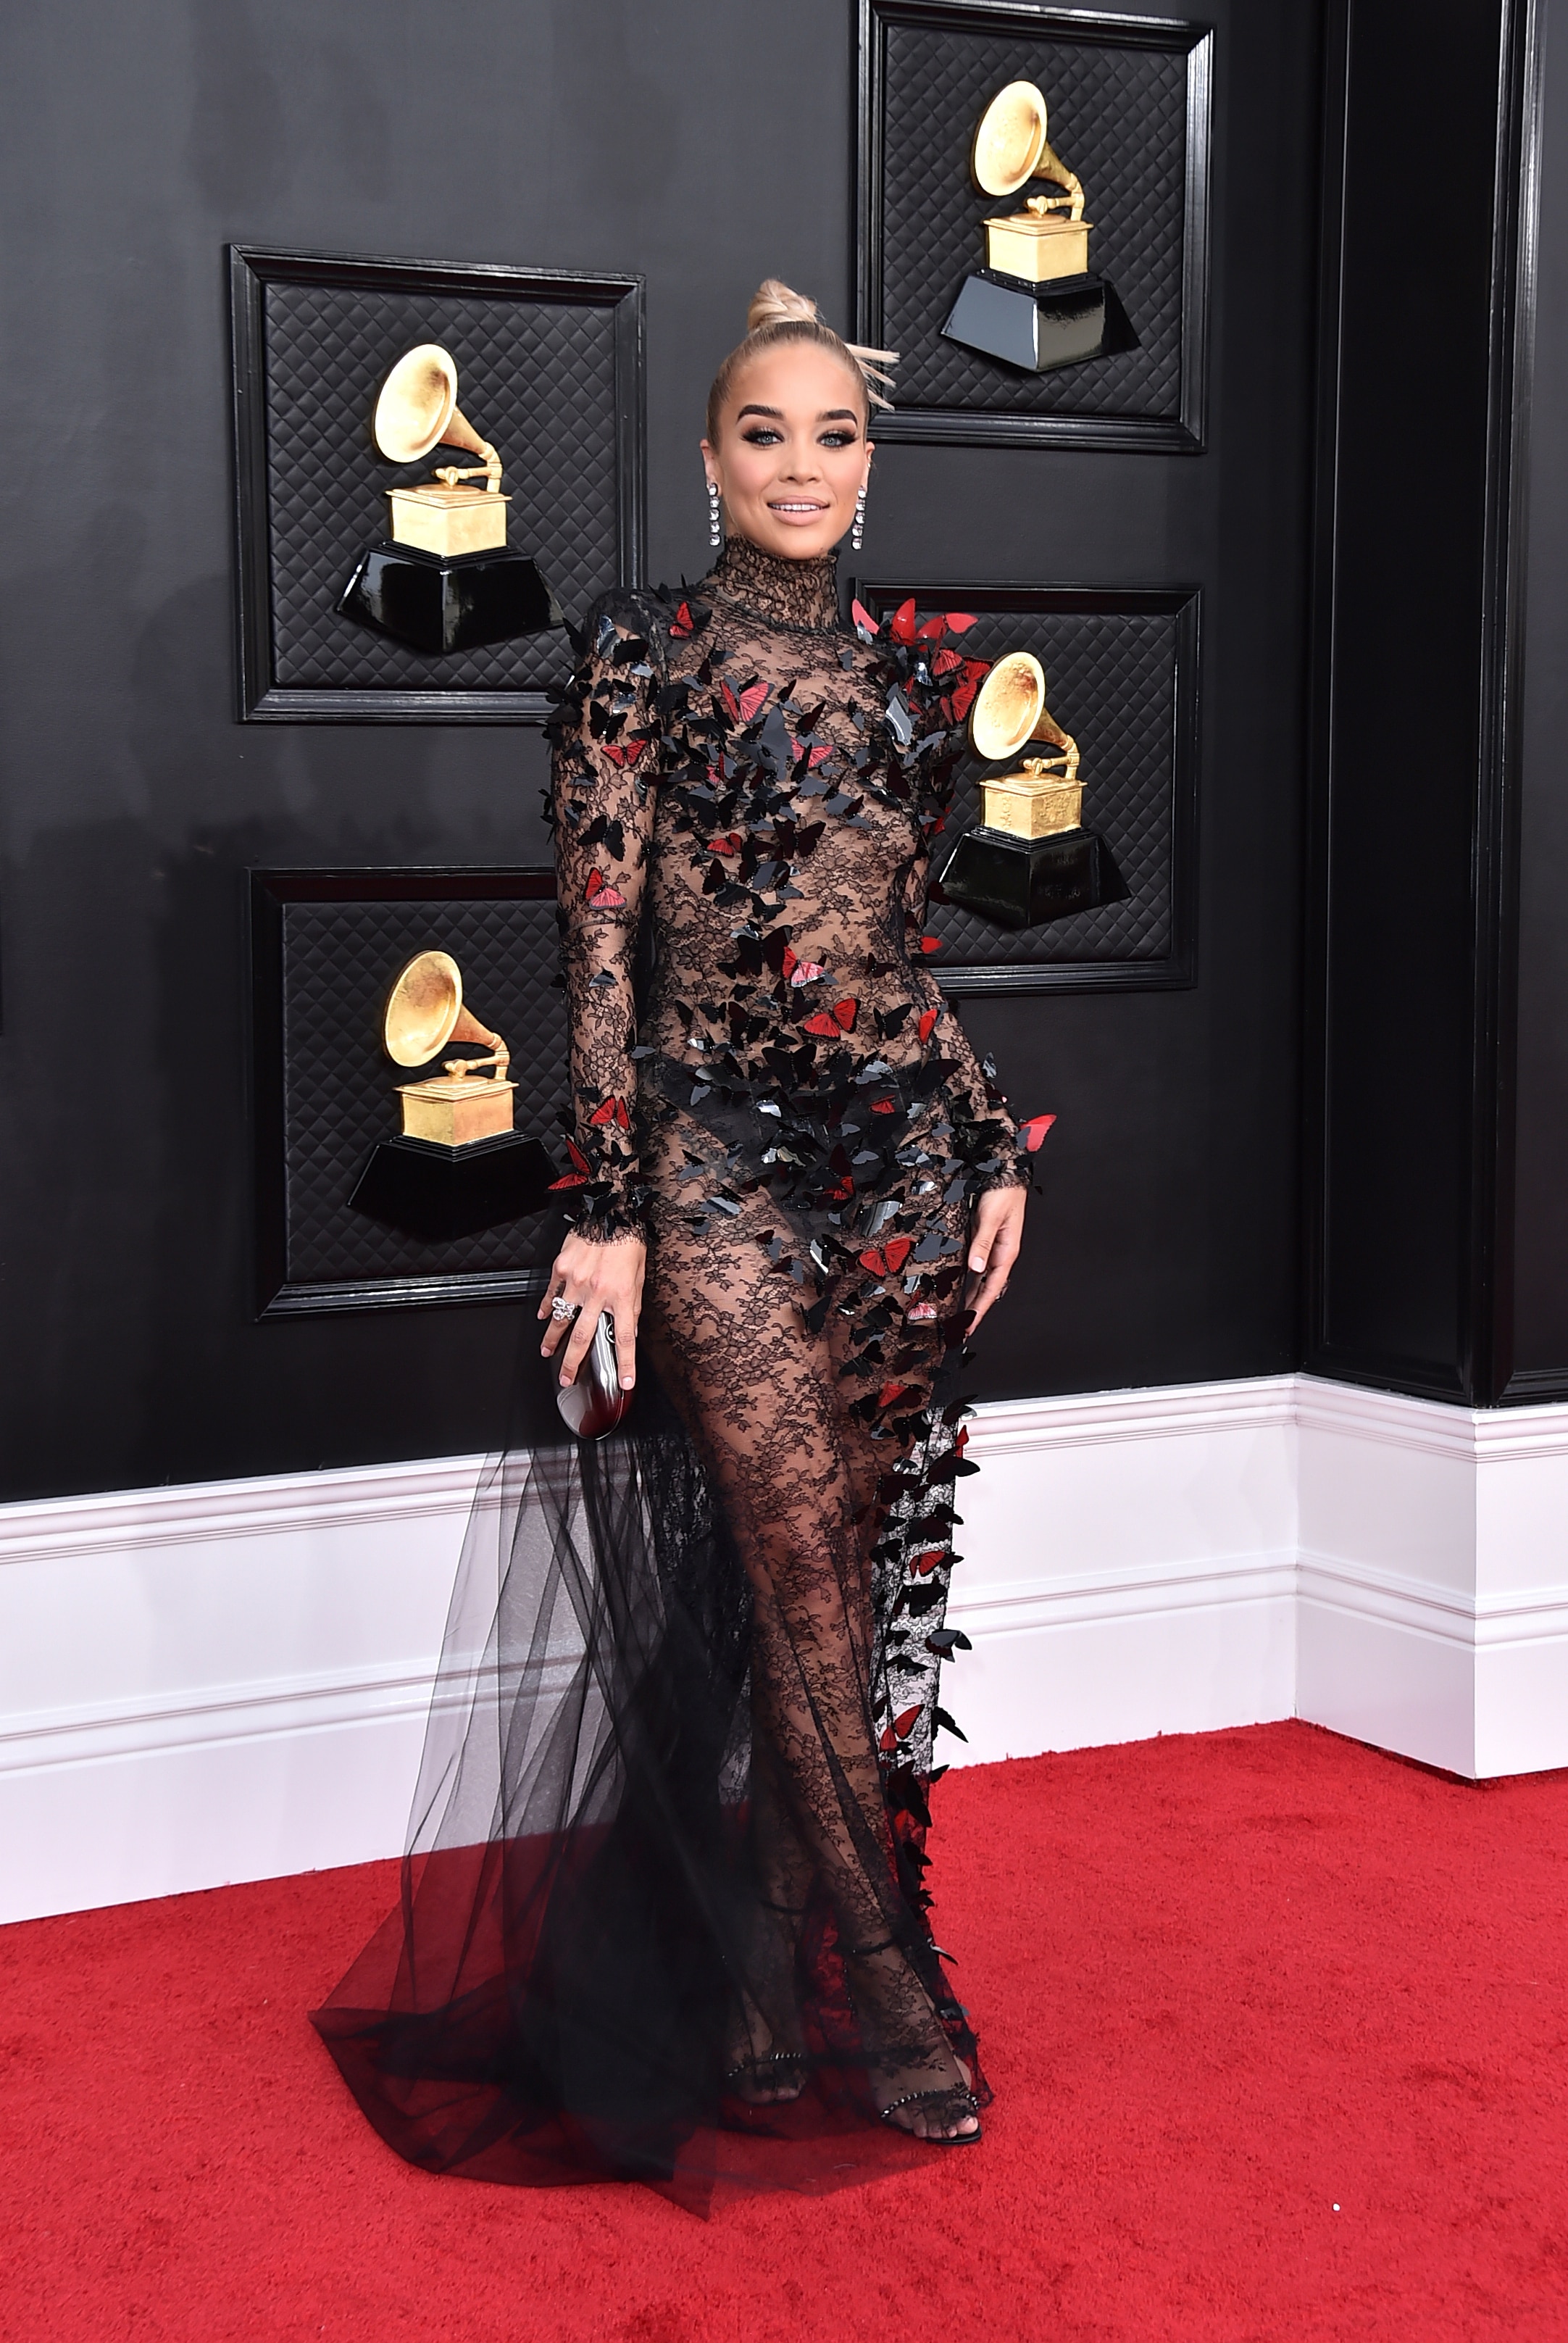 jasmine sanders poses on the grammys red carpet wearing a sheer black lace dress with black and red butterfly accents